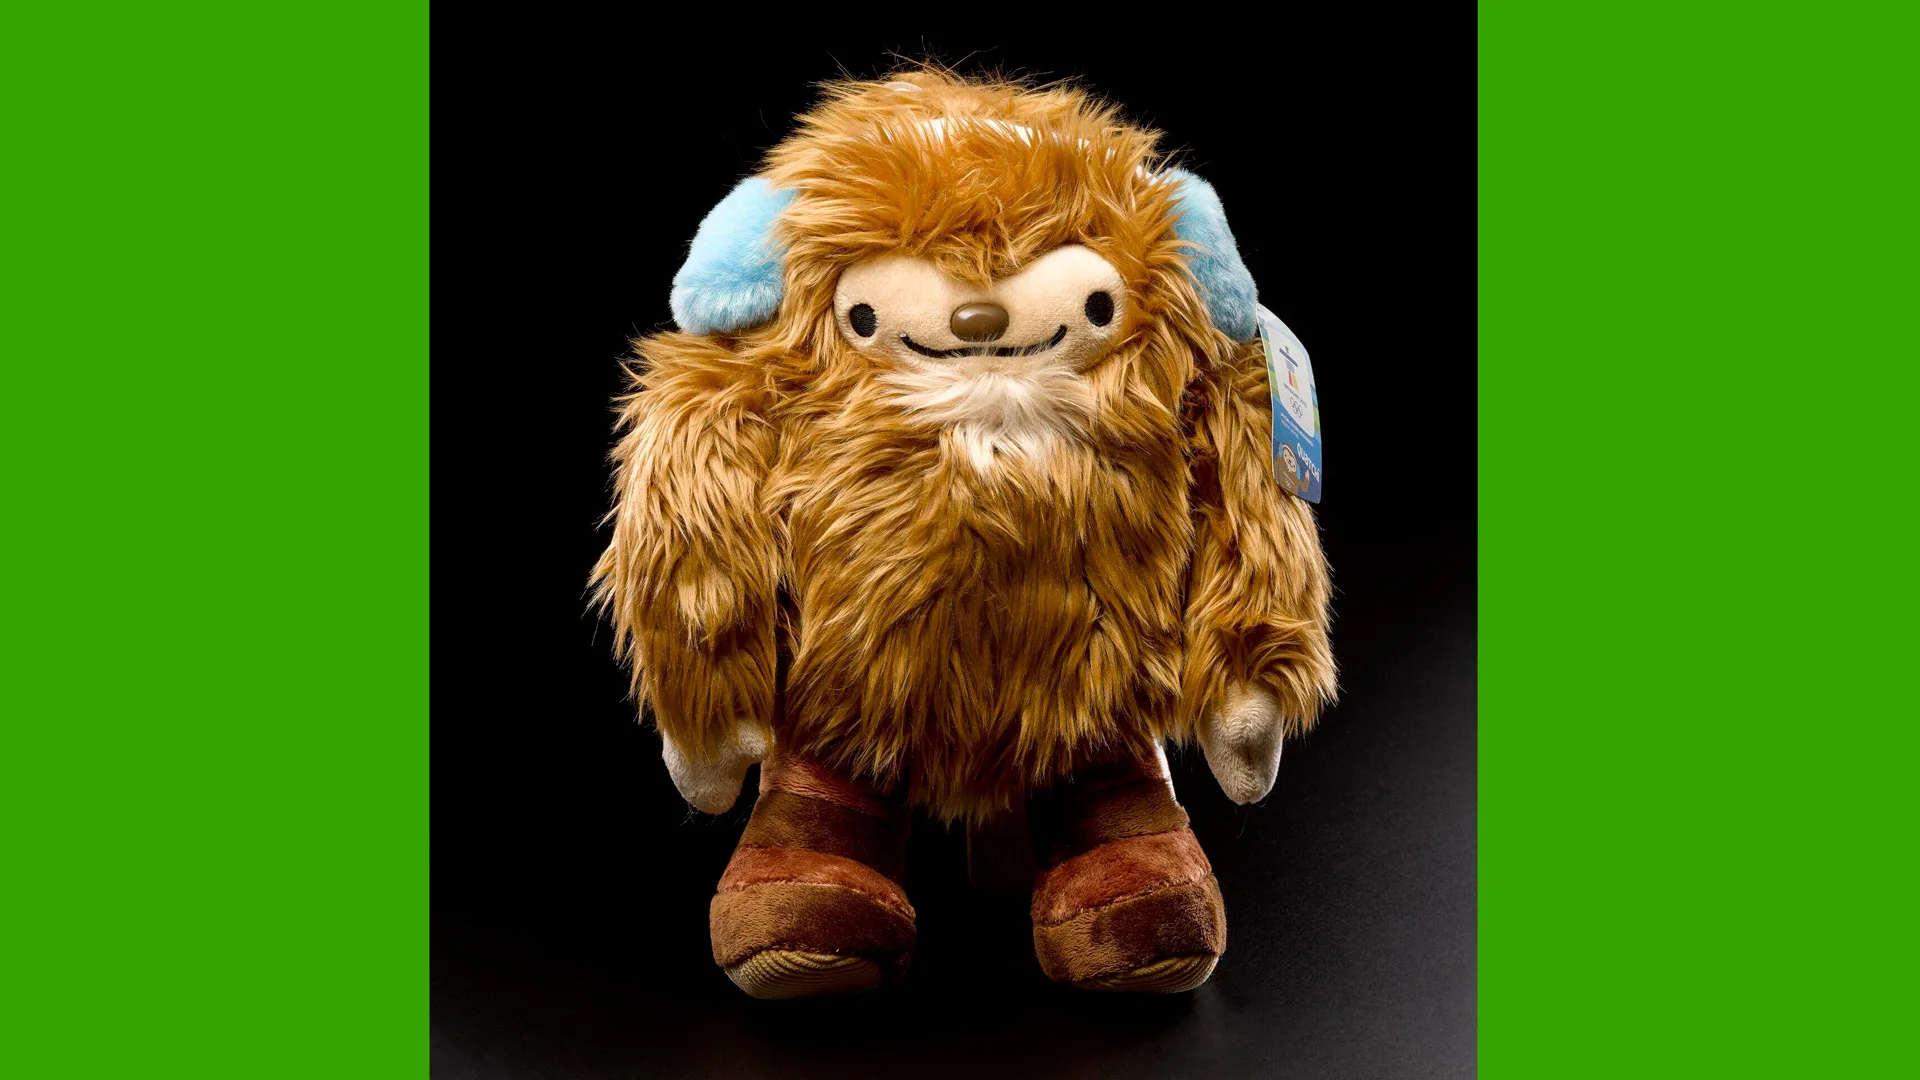 A photo of the V&A collection of a soft toy called Quatchi who was a mascot for the 2010 Vancouver Olympic Games.